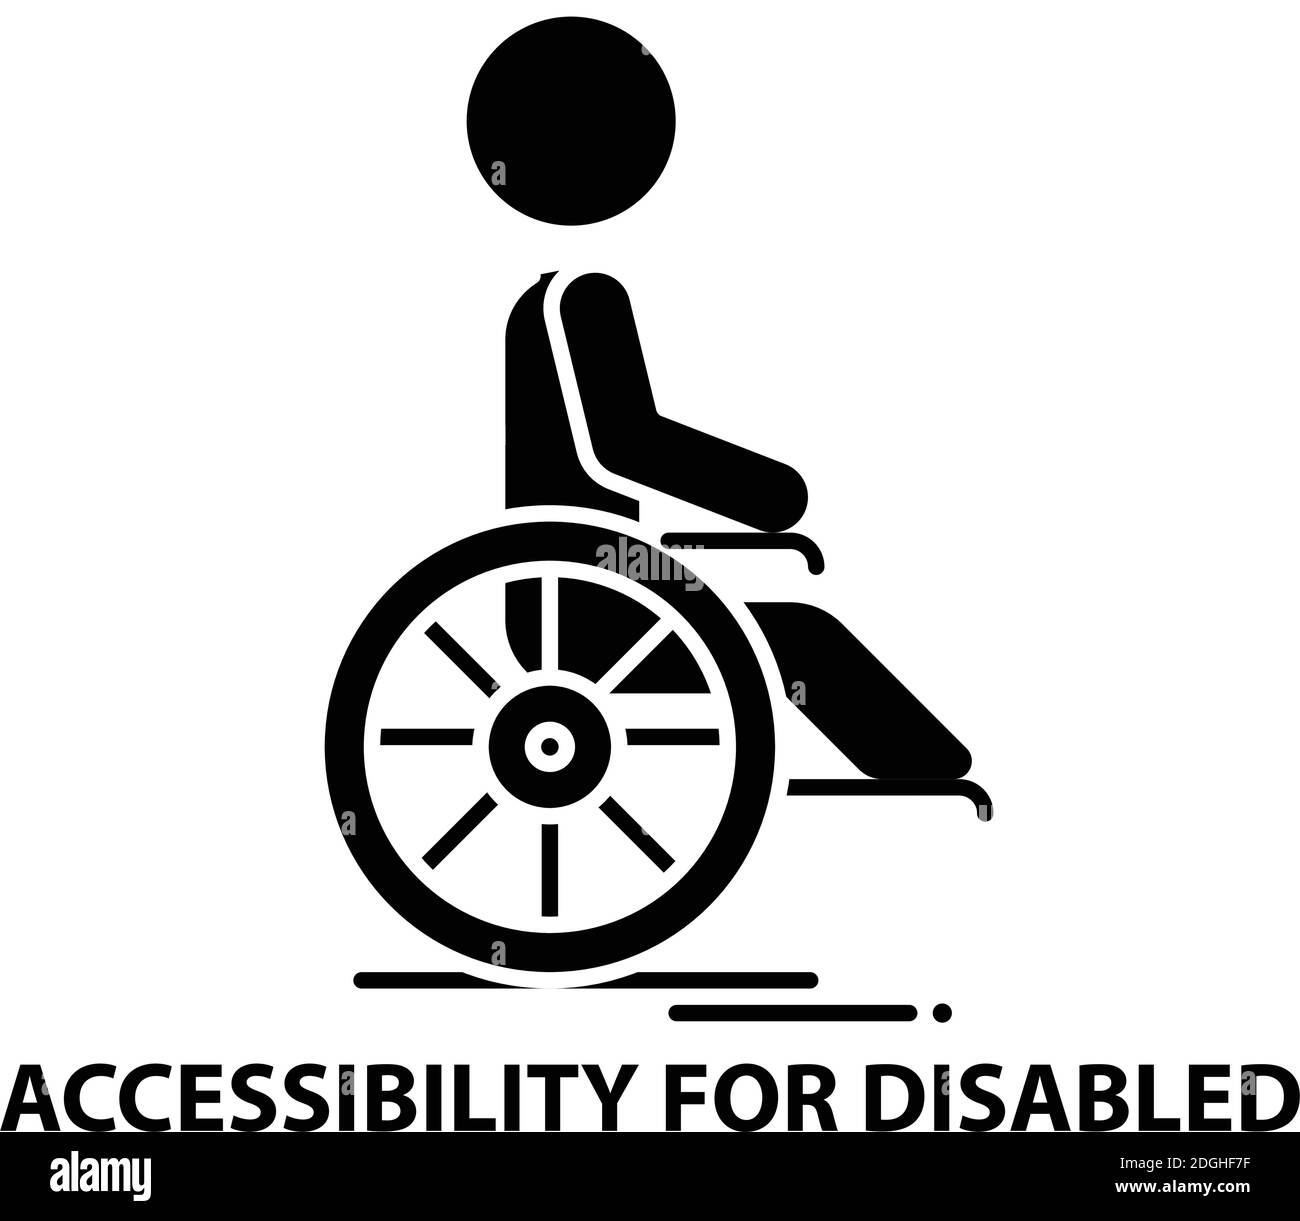 accessibility for disabled icon, black vector sign with editable strokes, concept illustration Stock Vector